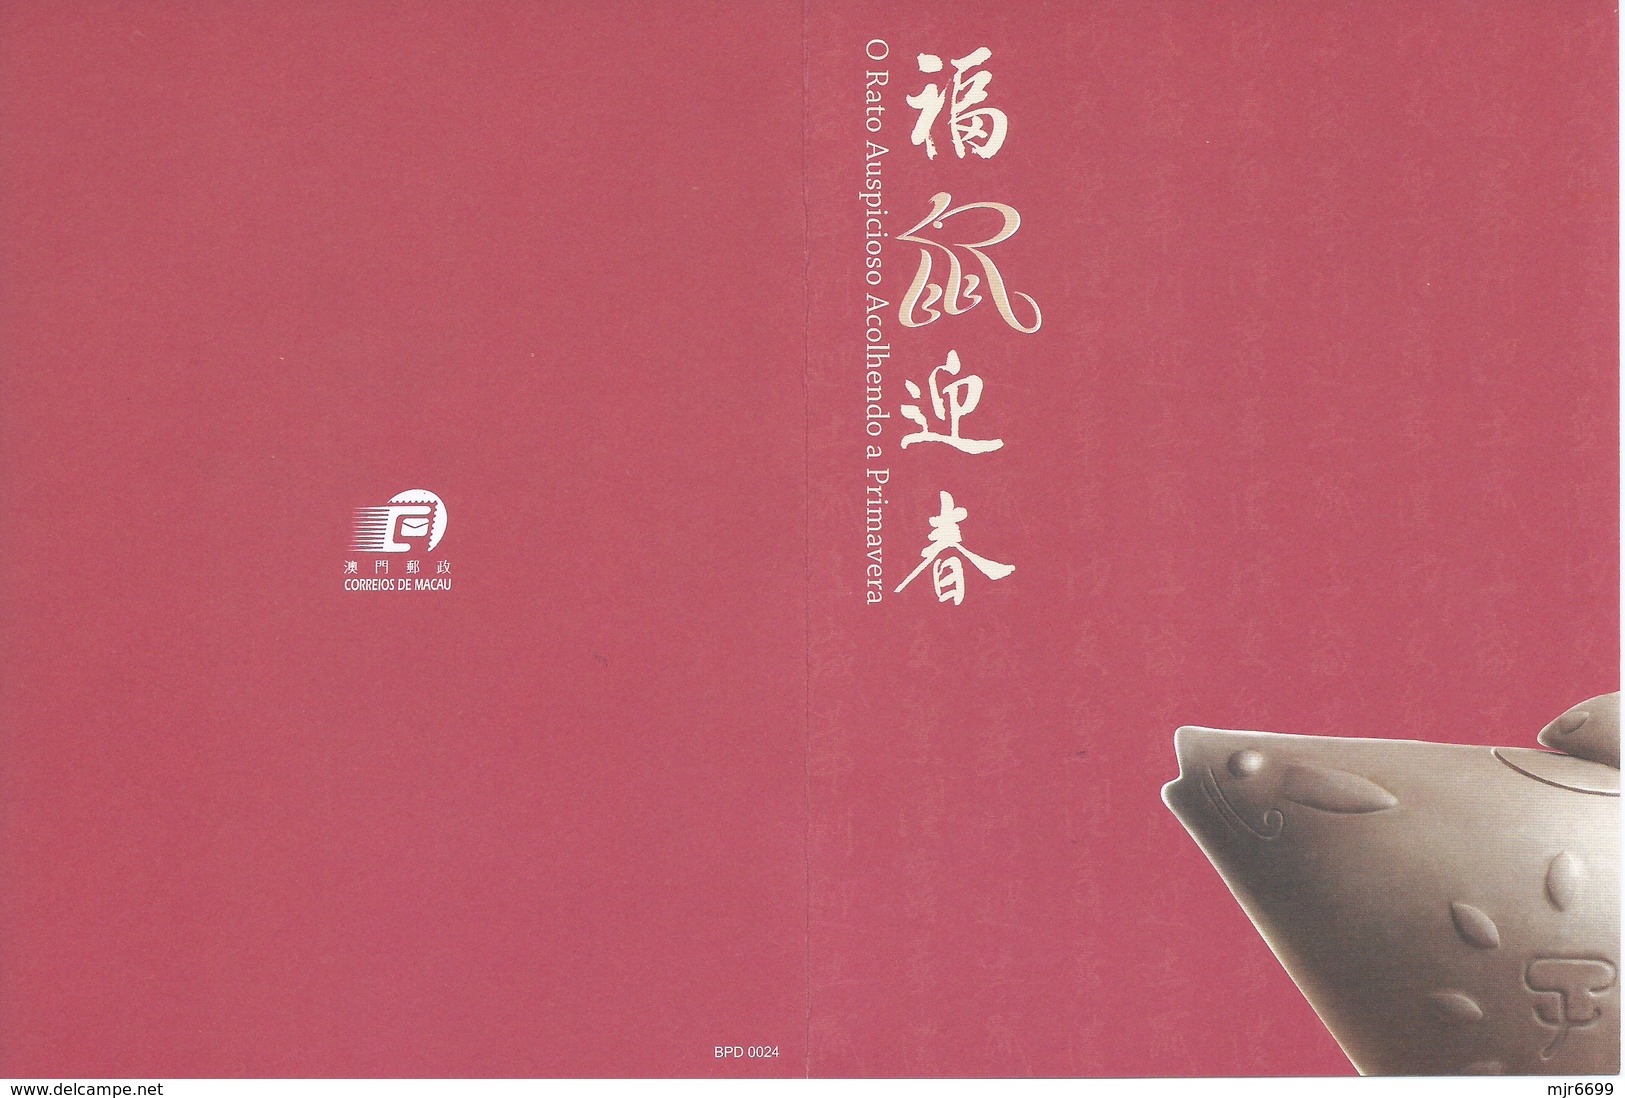 MACAU 2008 LUNAR YEAR OF THE RAT GREETING CARD & POSTAGE PAID COVER FIRST DAY USAGE - Entiers Postaux